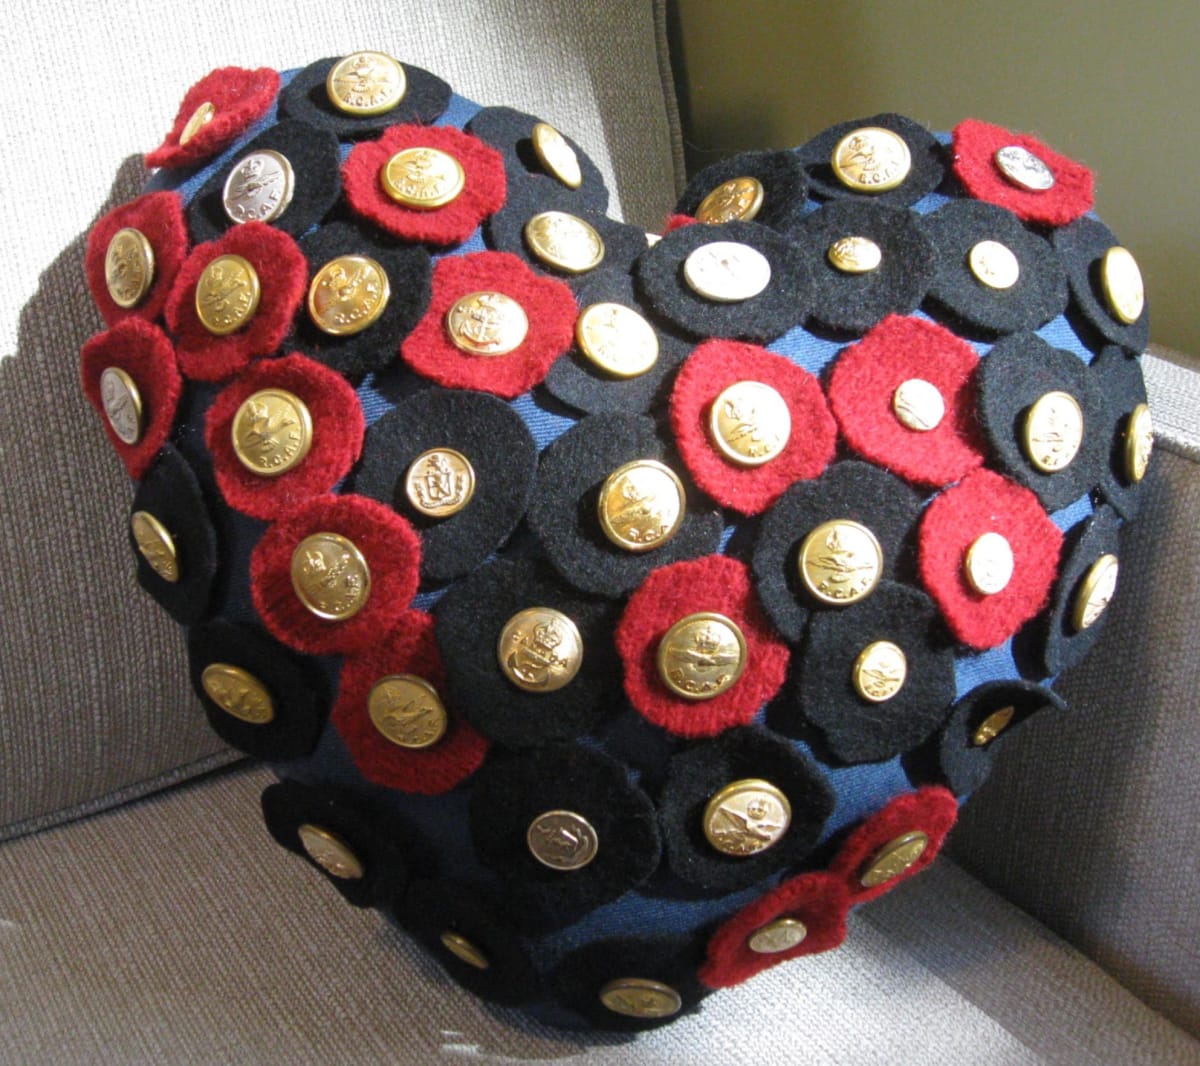 Soldier's Heart by Lesley Turner  Image: Lesley Turner, 'Soldier's Heart',  2018, 14"h x 14"w x 3"d. An air force uniform textile heart-shaped pillow embellished with military buttons and wool felt flowers.